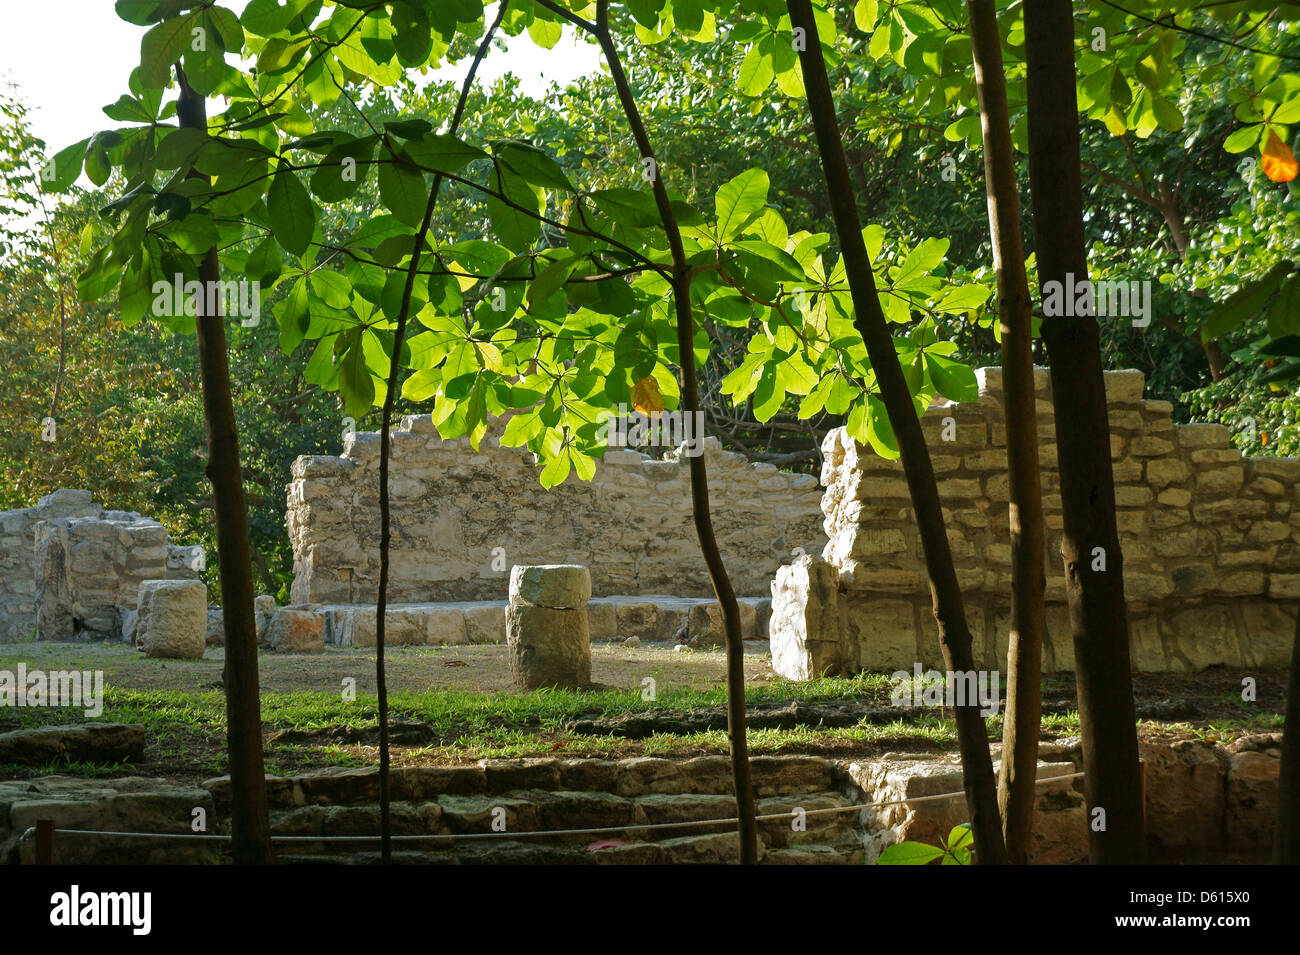 South Complex, San Miguelito archaeological site adjacent to the new Museo Maya de Cancun museum, Cancun, Mexico Stock Photo